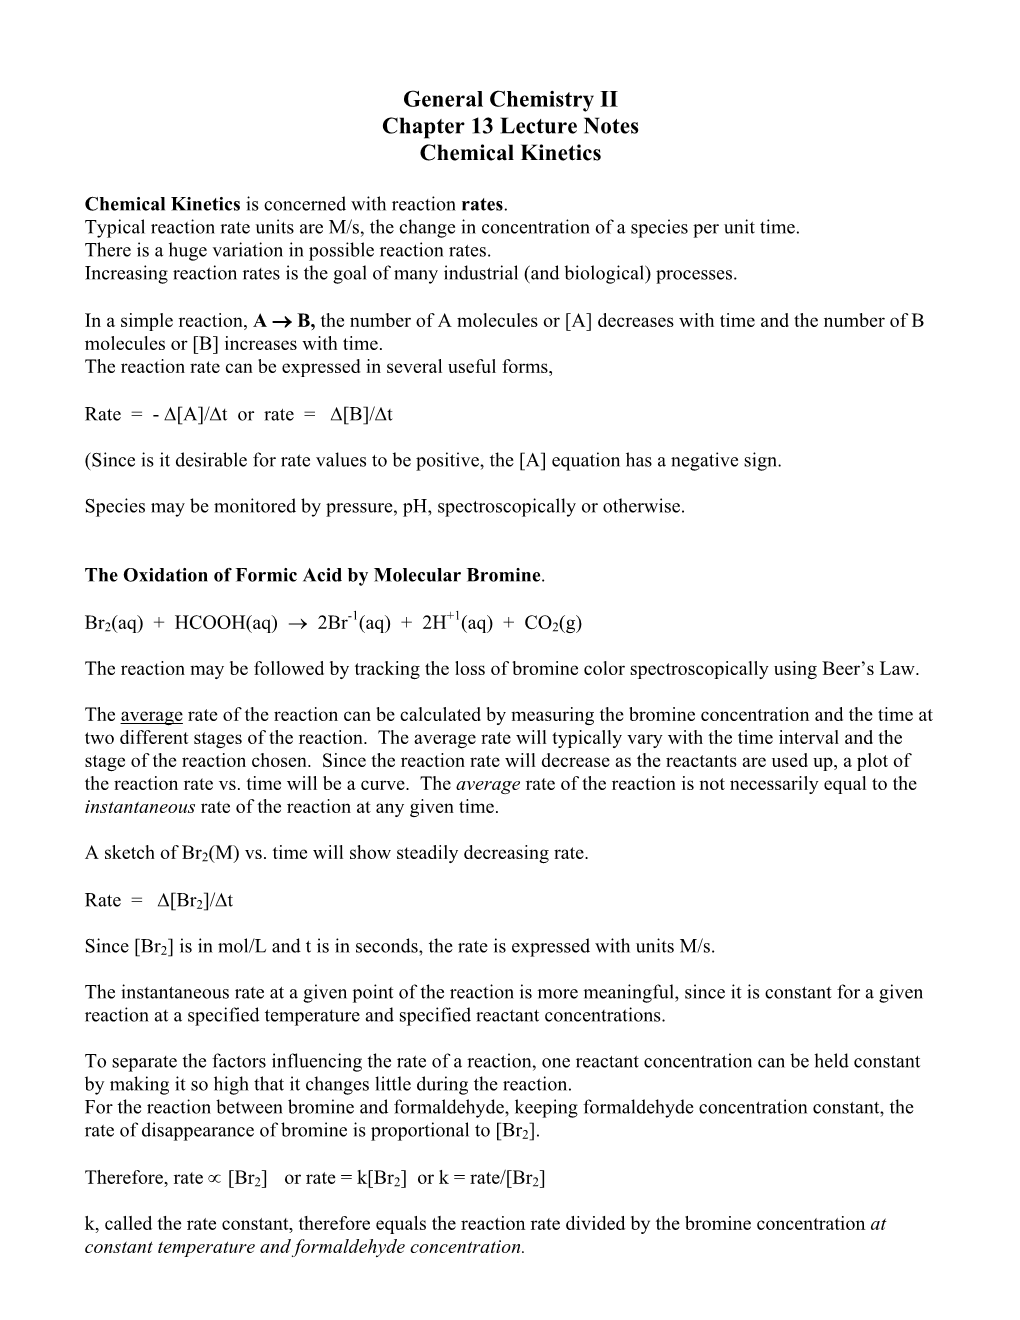 General Chemistry II Chapter 13 Lecture Notes Chemical Kinetics